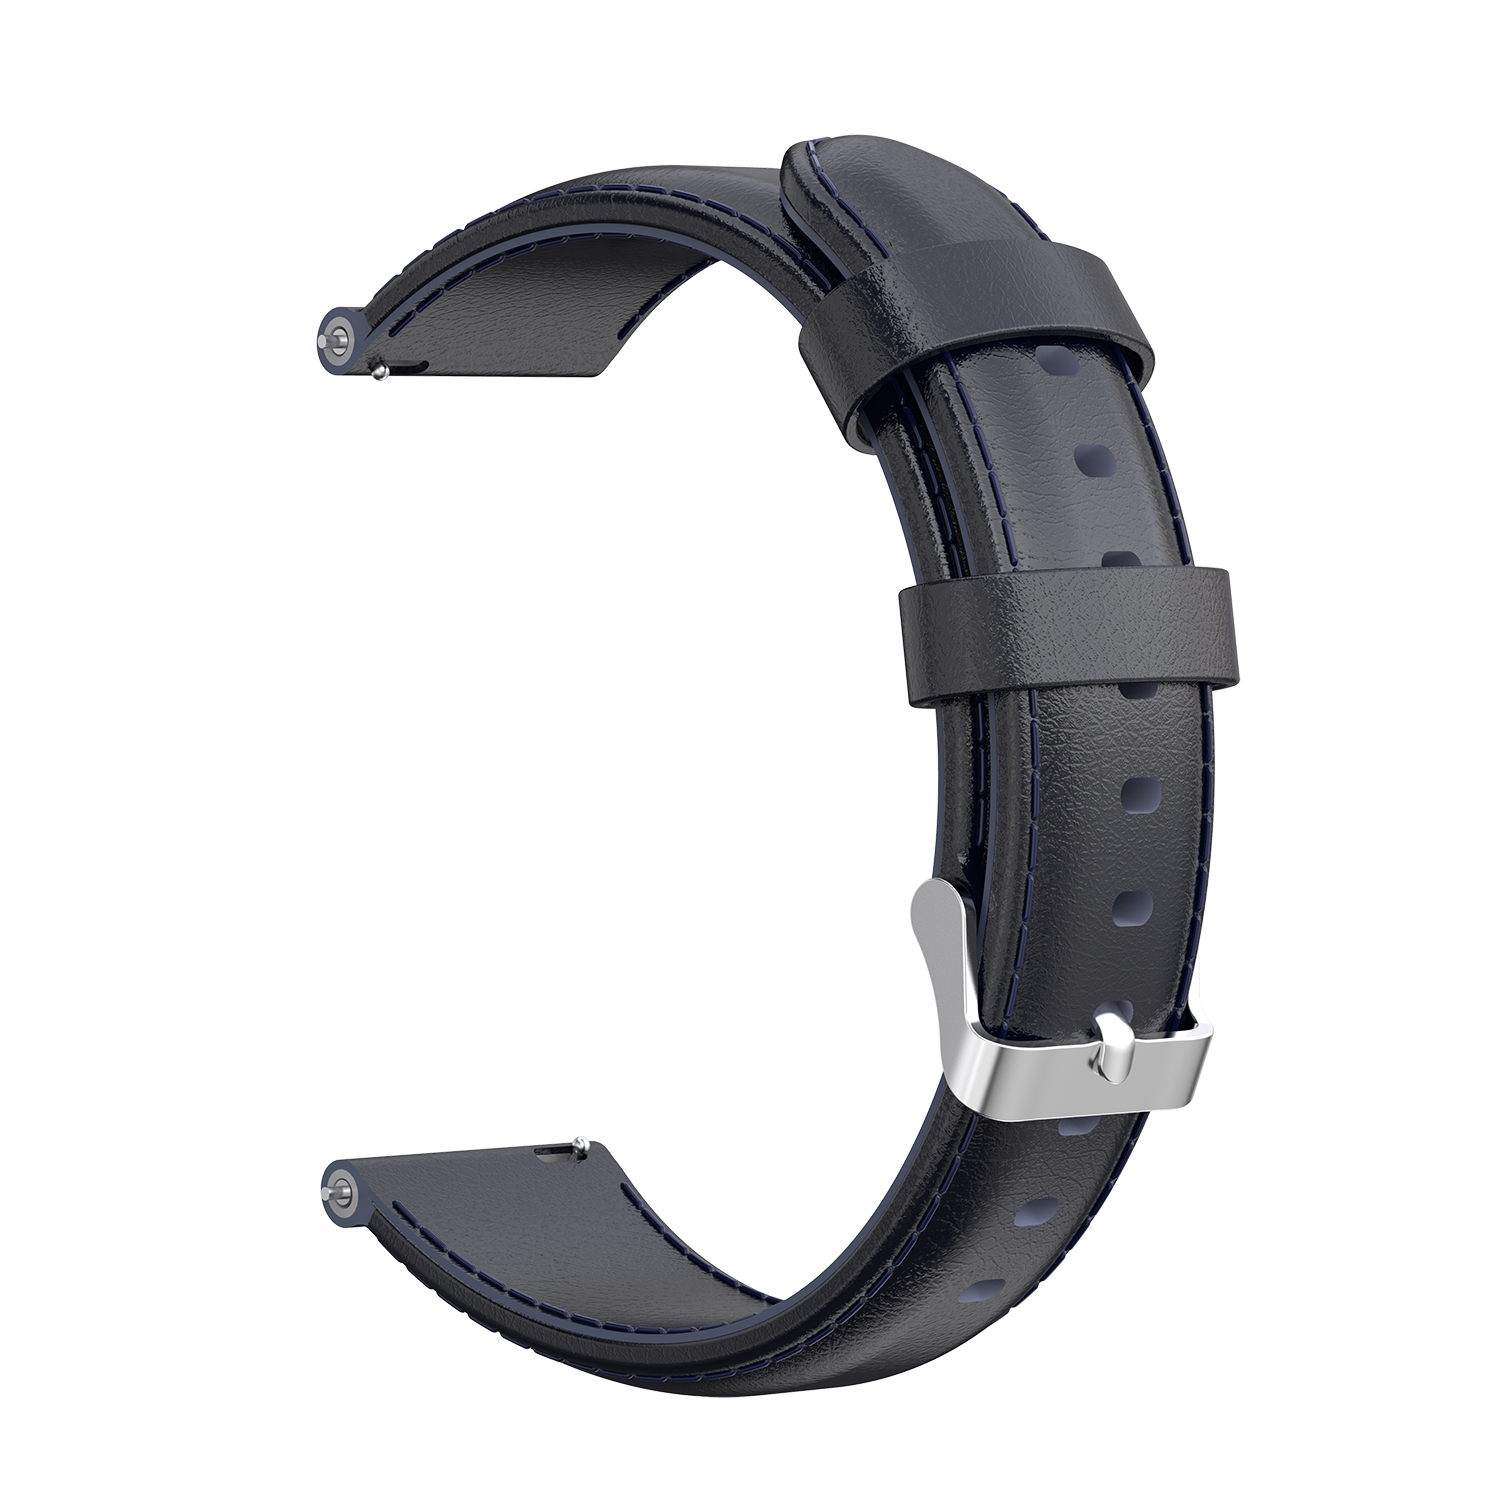 Bakeey-22mm-Genuine-Leather-Replacement-Strap-Smart-Watch-Band-For-Amazfit-GTR-47MM-1786519-10